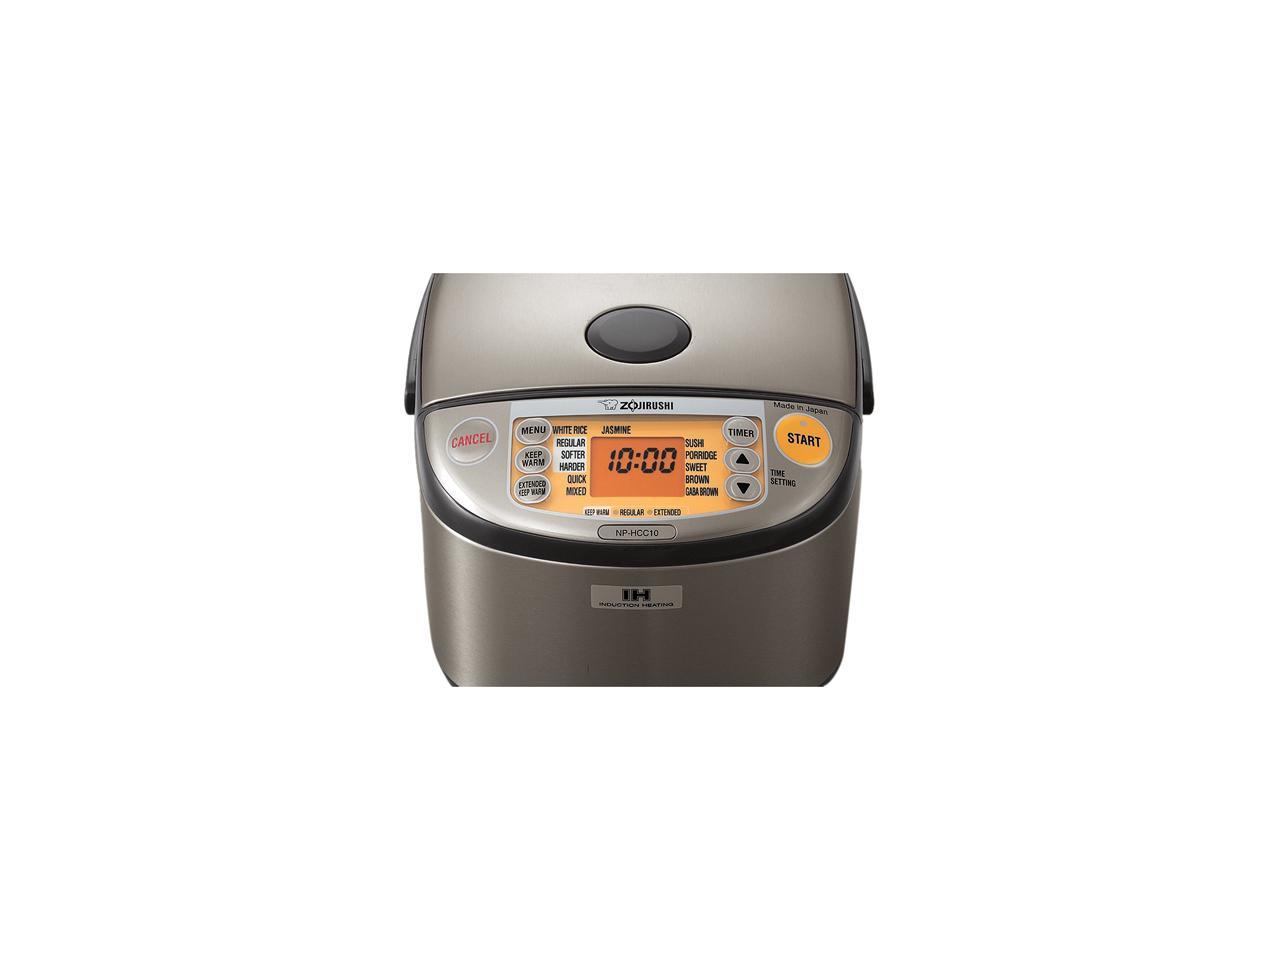 Zojirushi NP-HCC10XH 5.5 cups & 1 L Induction Heating System Rice